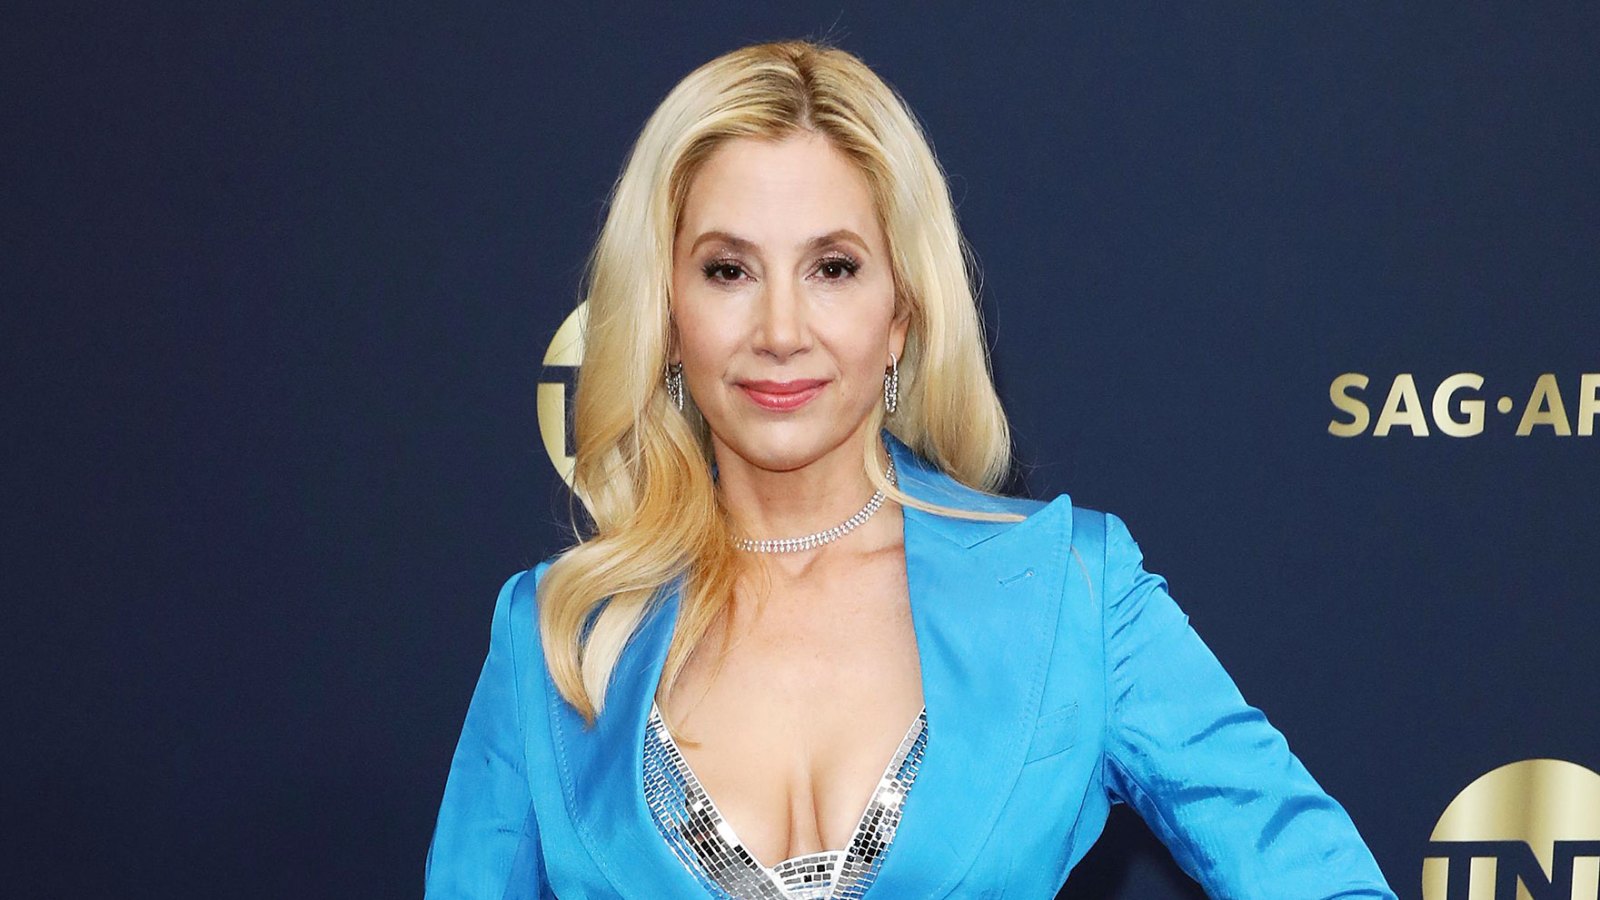 25 Things You Don’t Know About Mira Sorvino